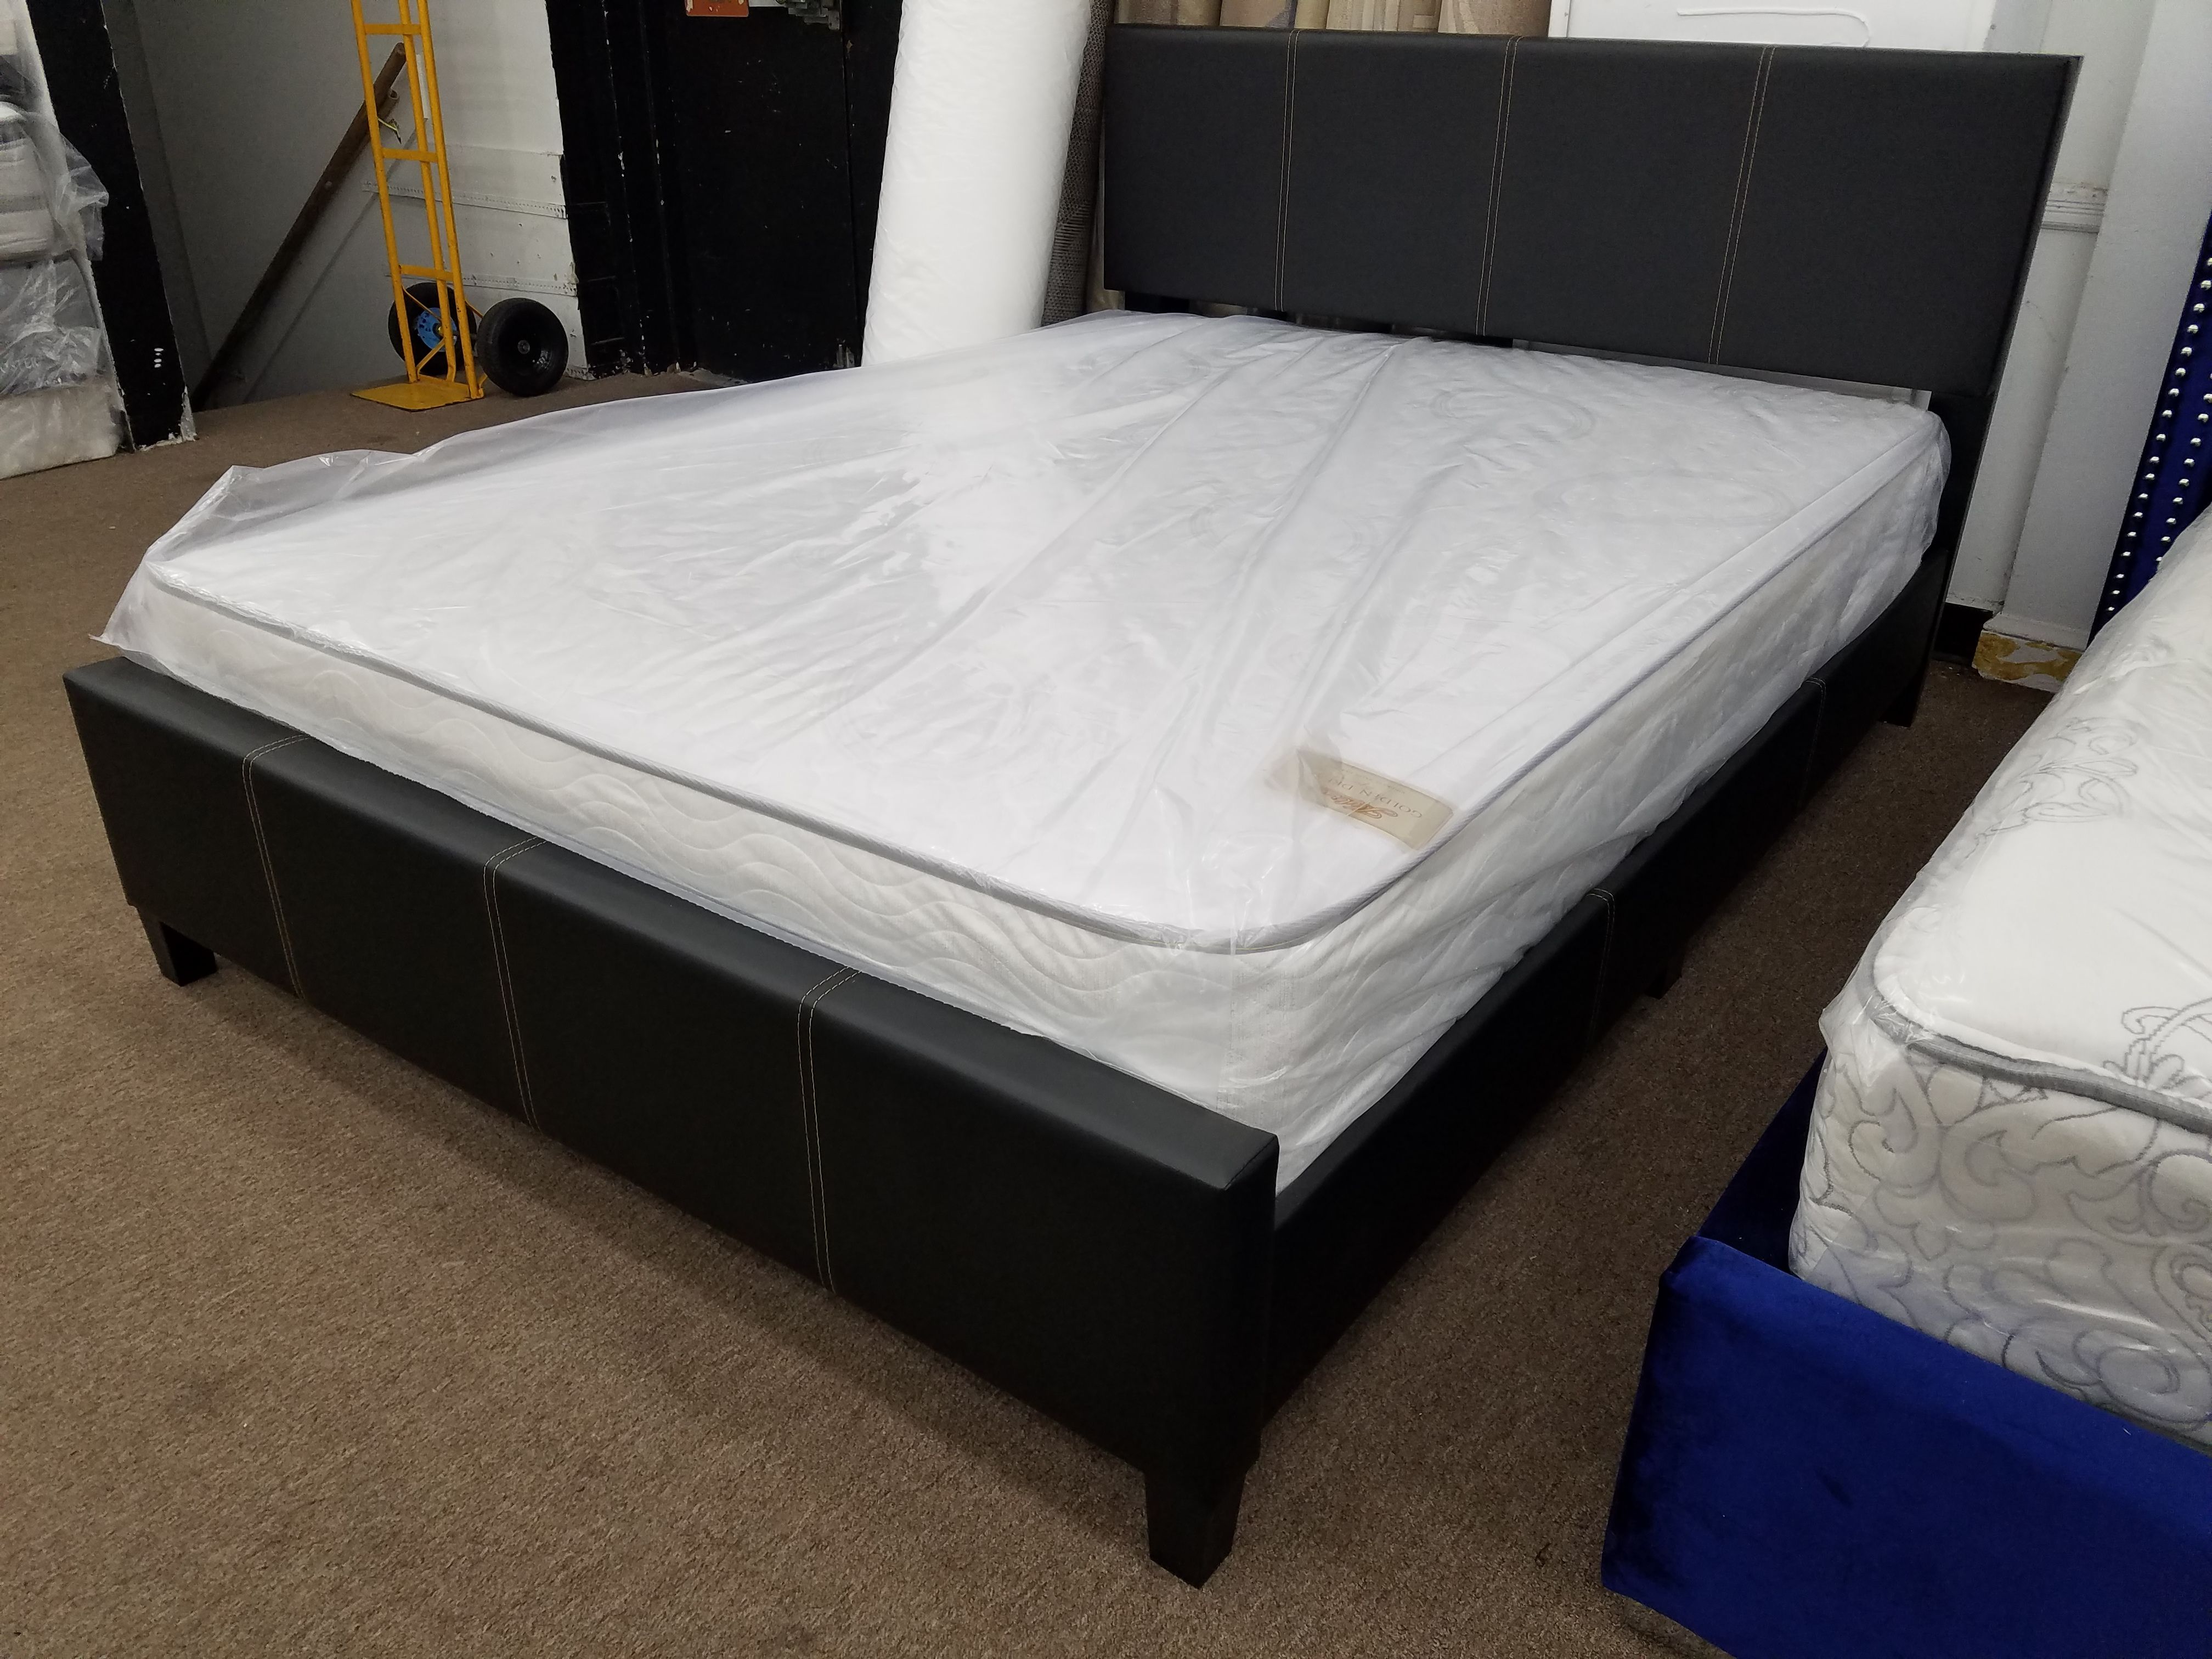 New in box black color platform bed with double sided sided 14 inch thick pillow top mattress delivery and no credit check financing available